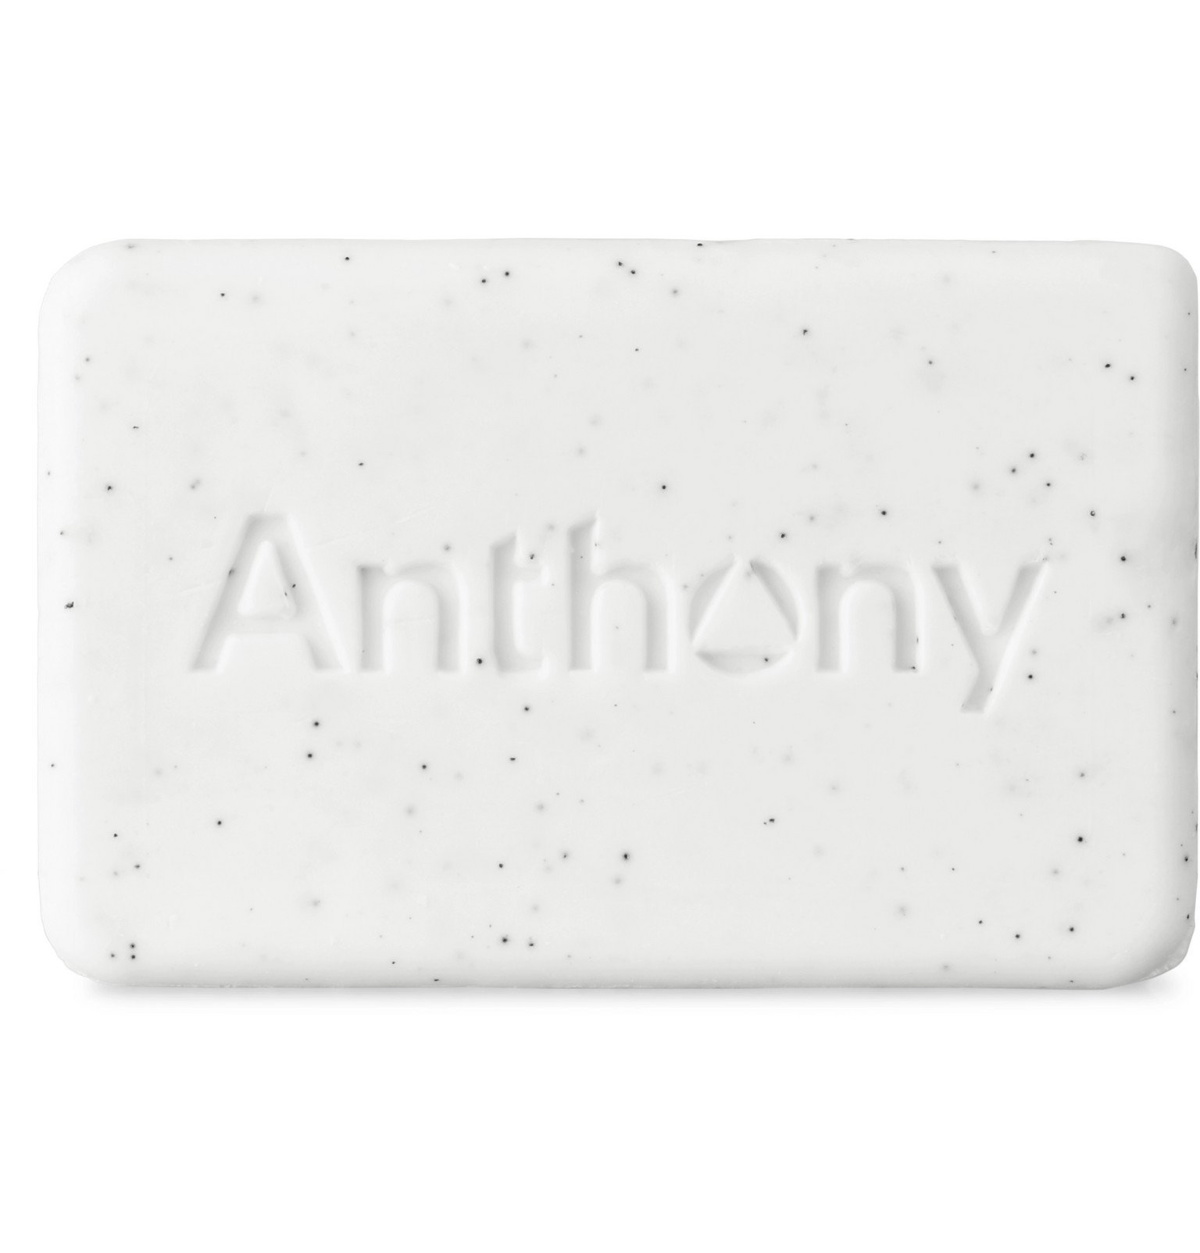 Exfoliating + Cleansing Face and Body Bar Soap - Anthony Skincare For Men